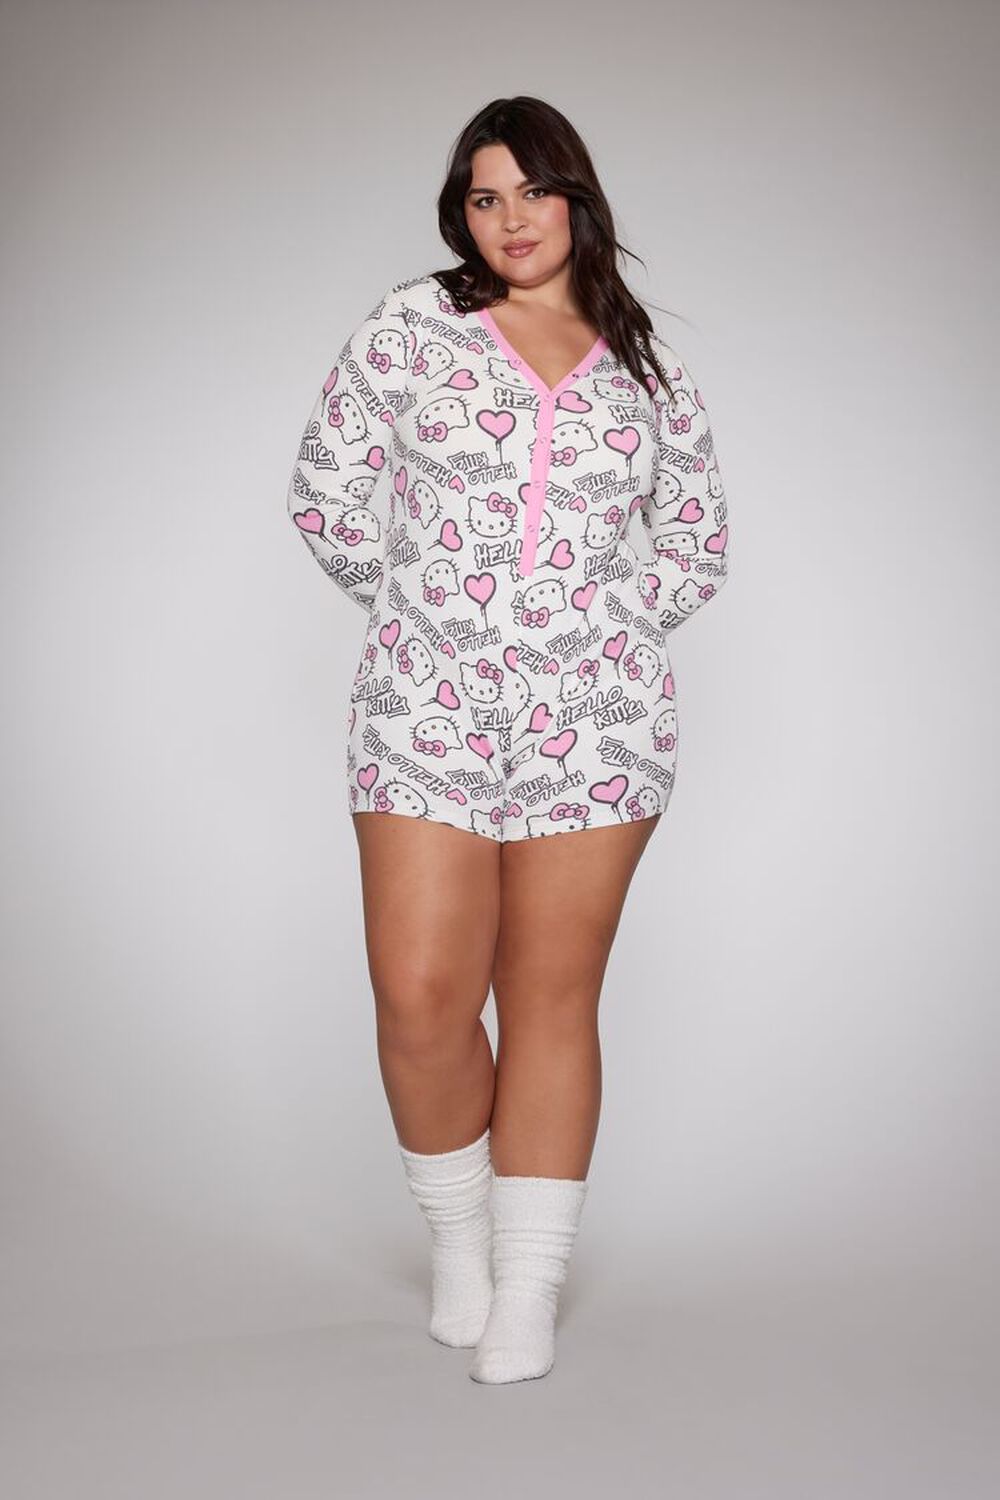 Forever 21 Hello Kitty exclusive puffer jacket plus size X